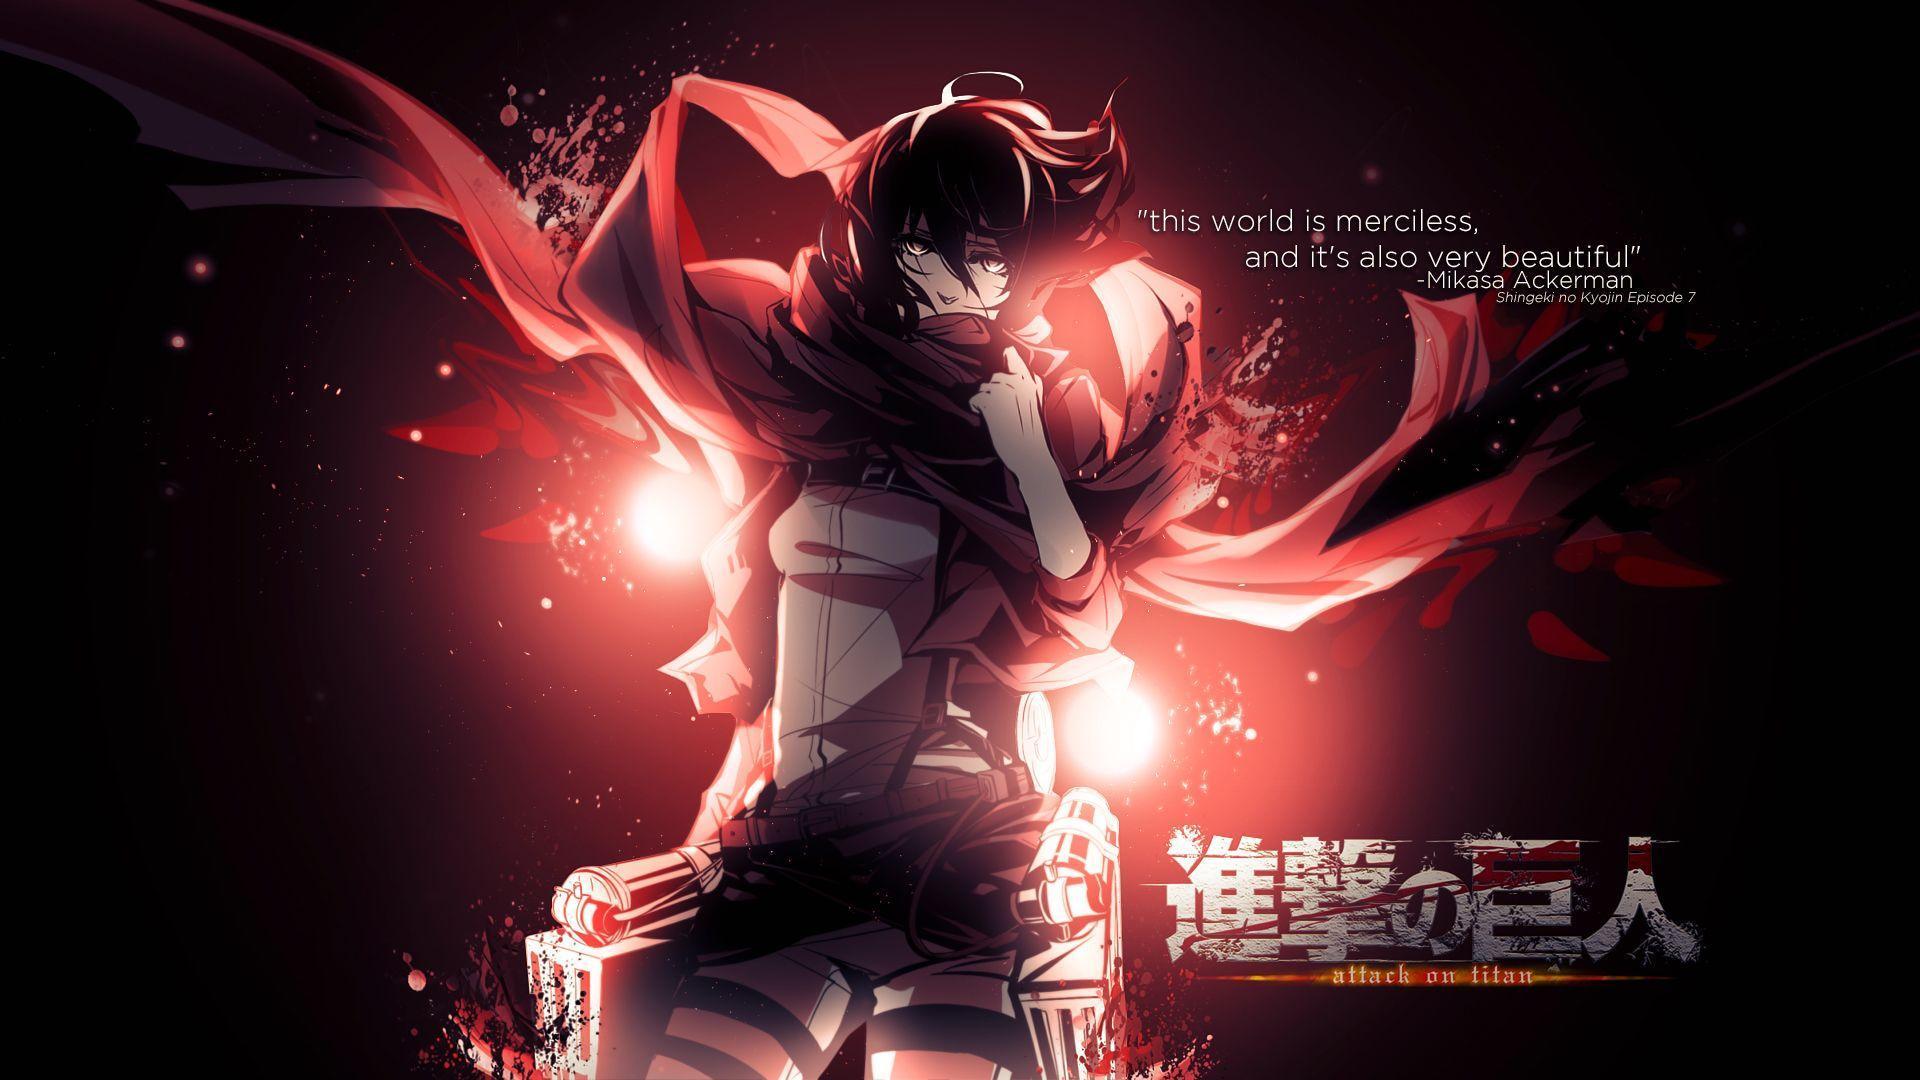 attack on titans wallpapers http://www.thenewsin/games/attack